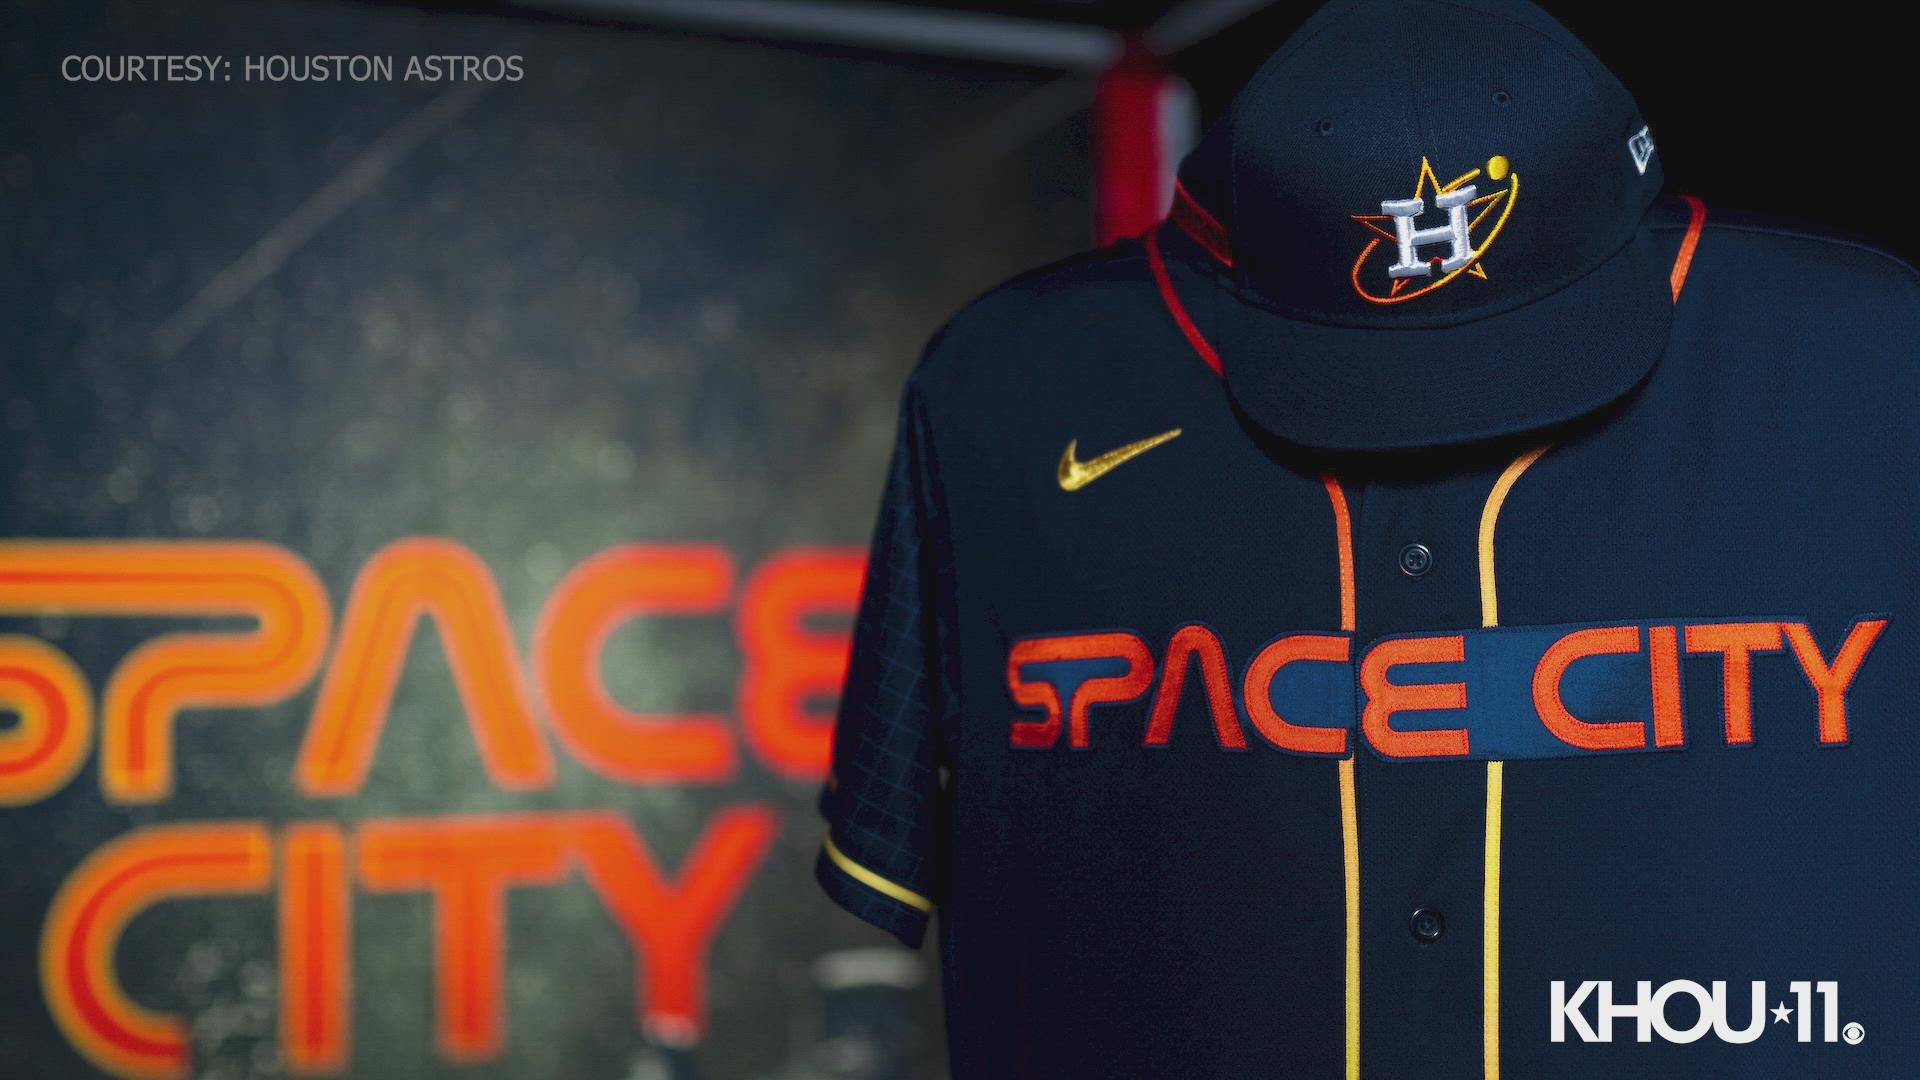 houston astros official team store